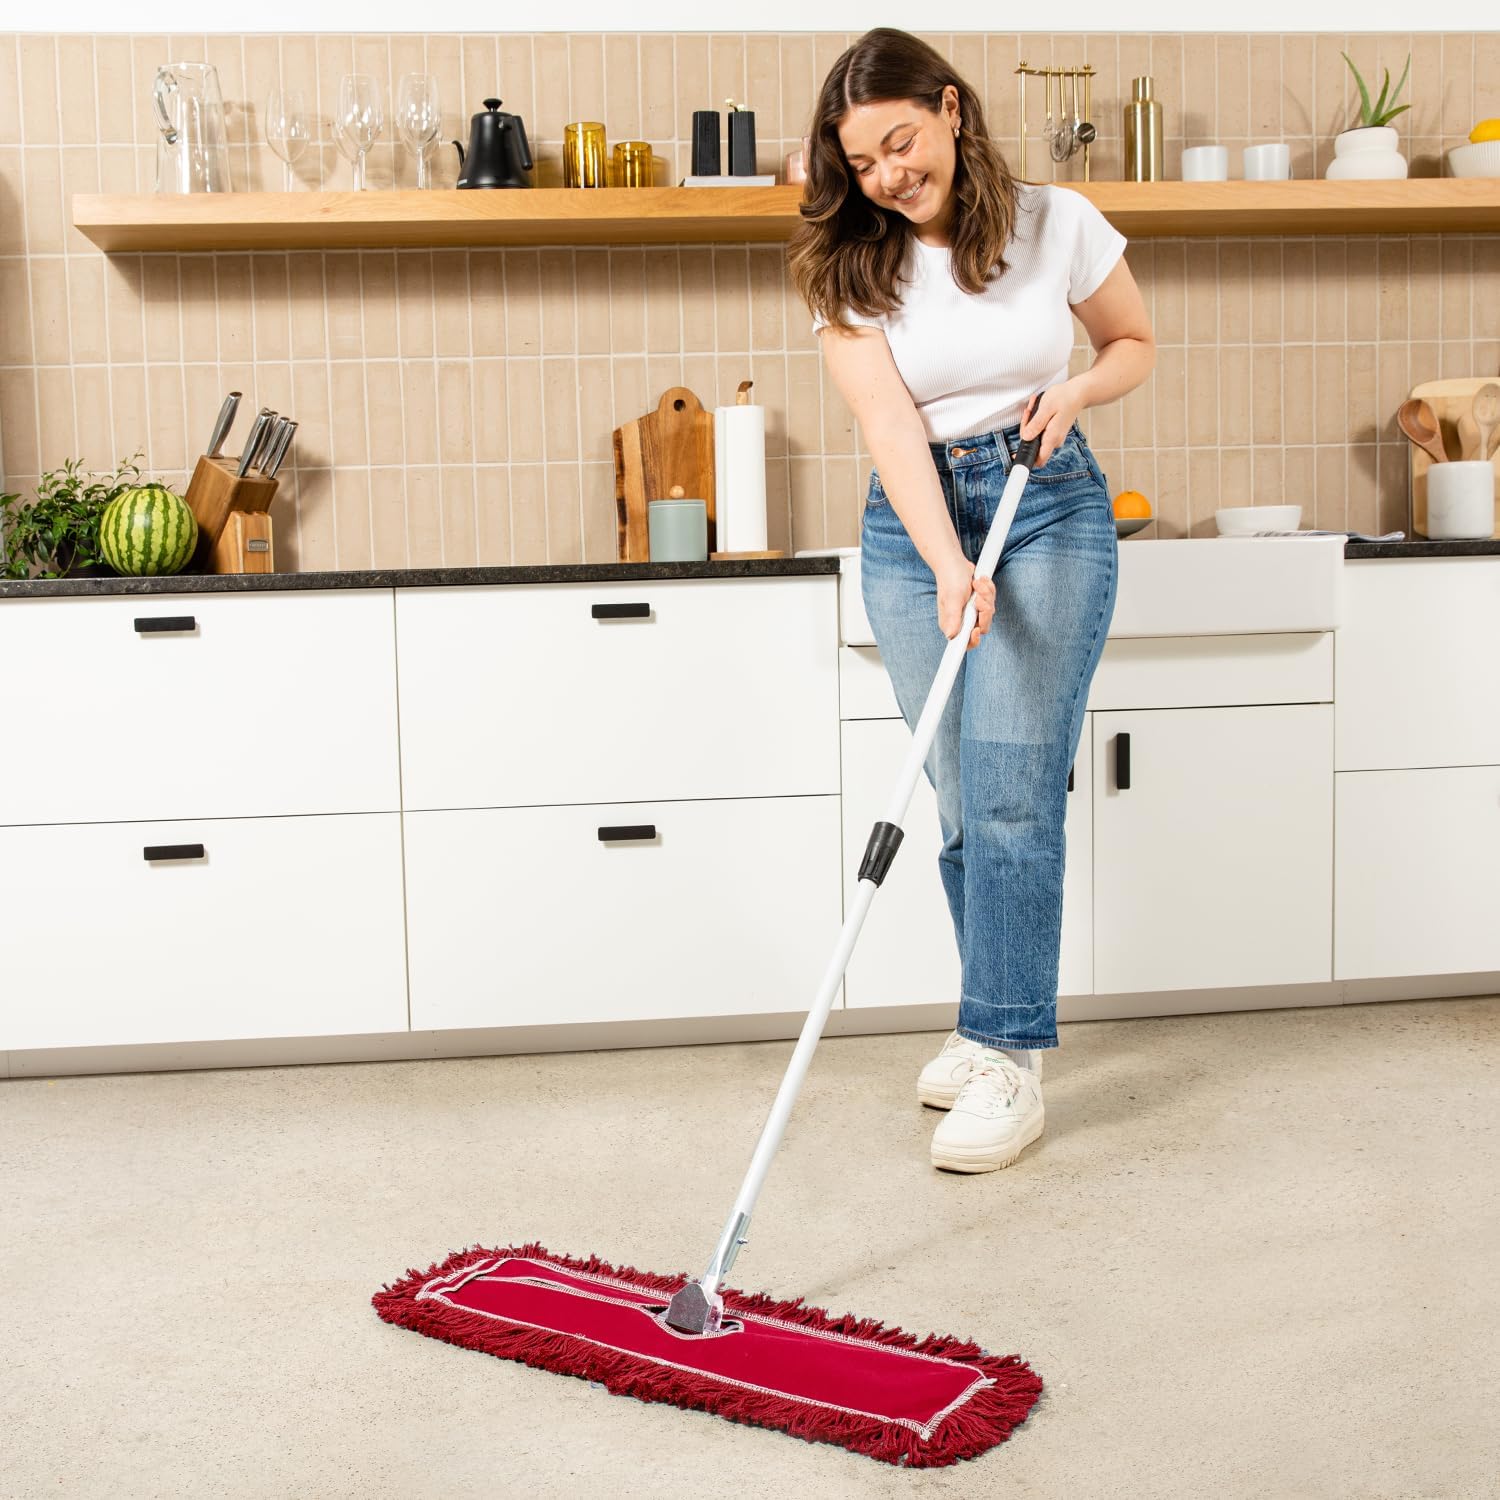 Tidy Tools 24 inch Dust Mop Kit Extendable Handle, Red